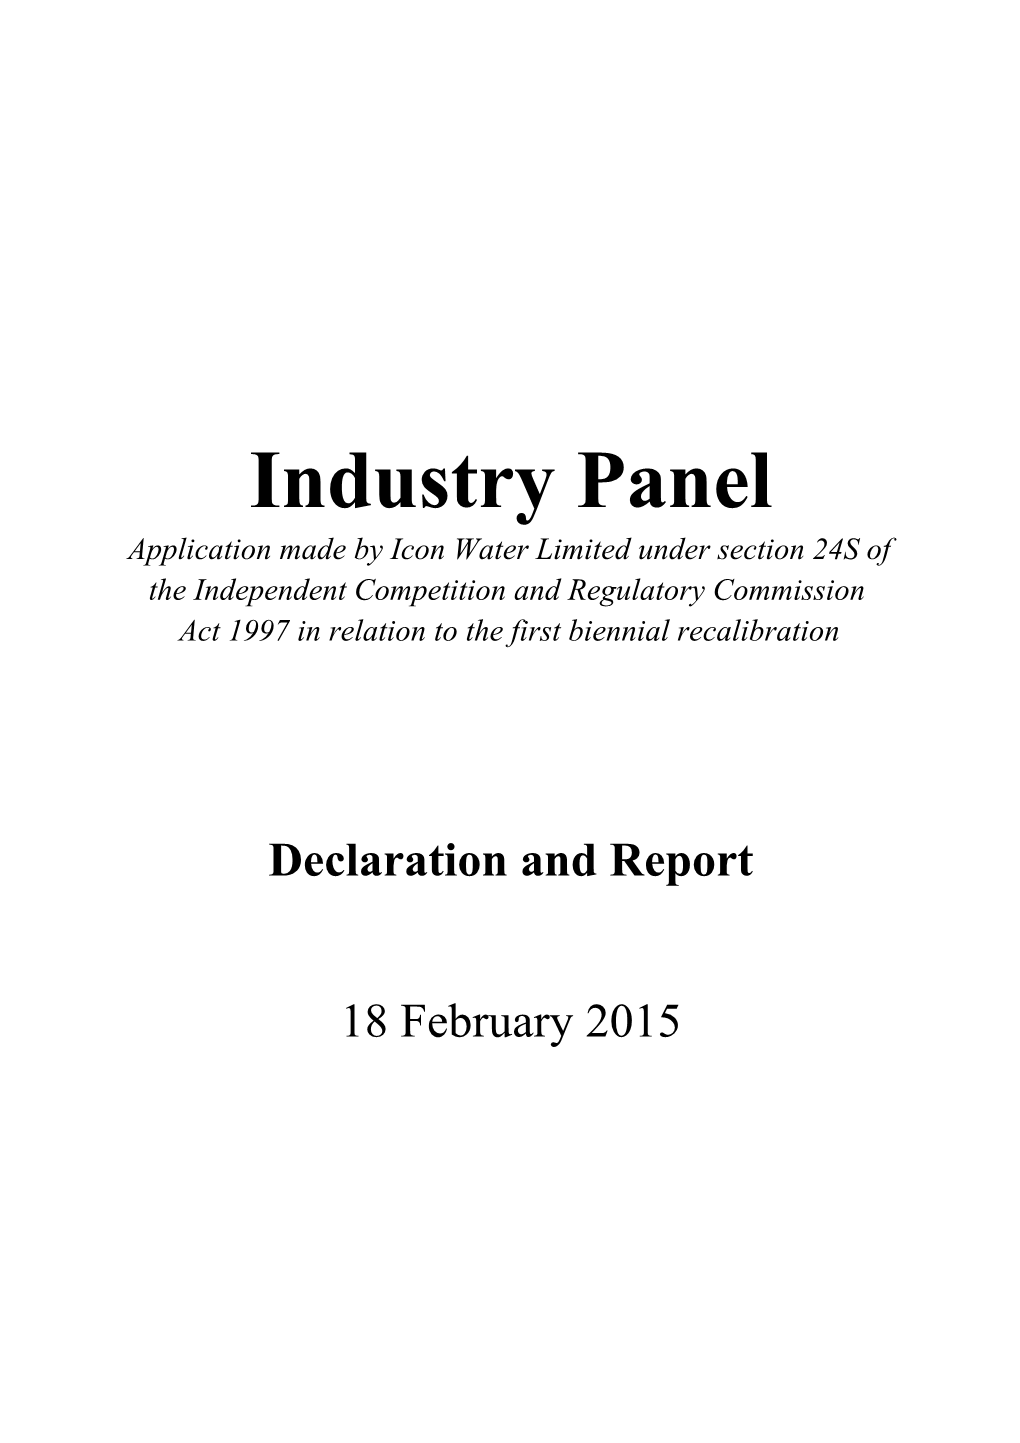 Final Report - S24S Application by Icon Water